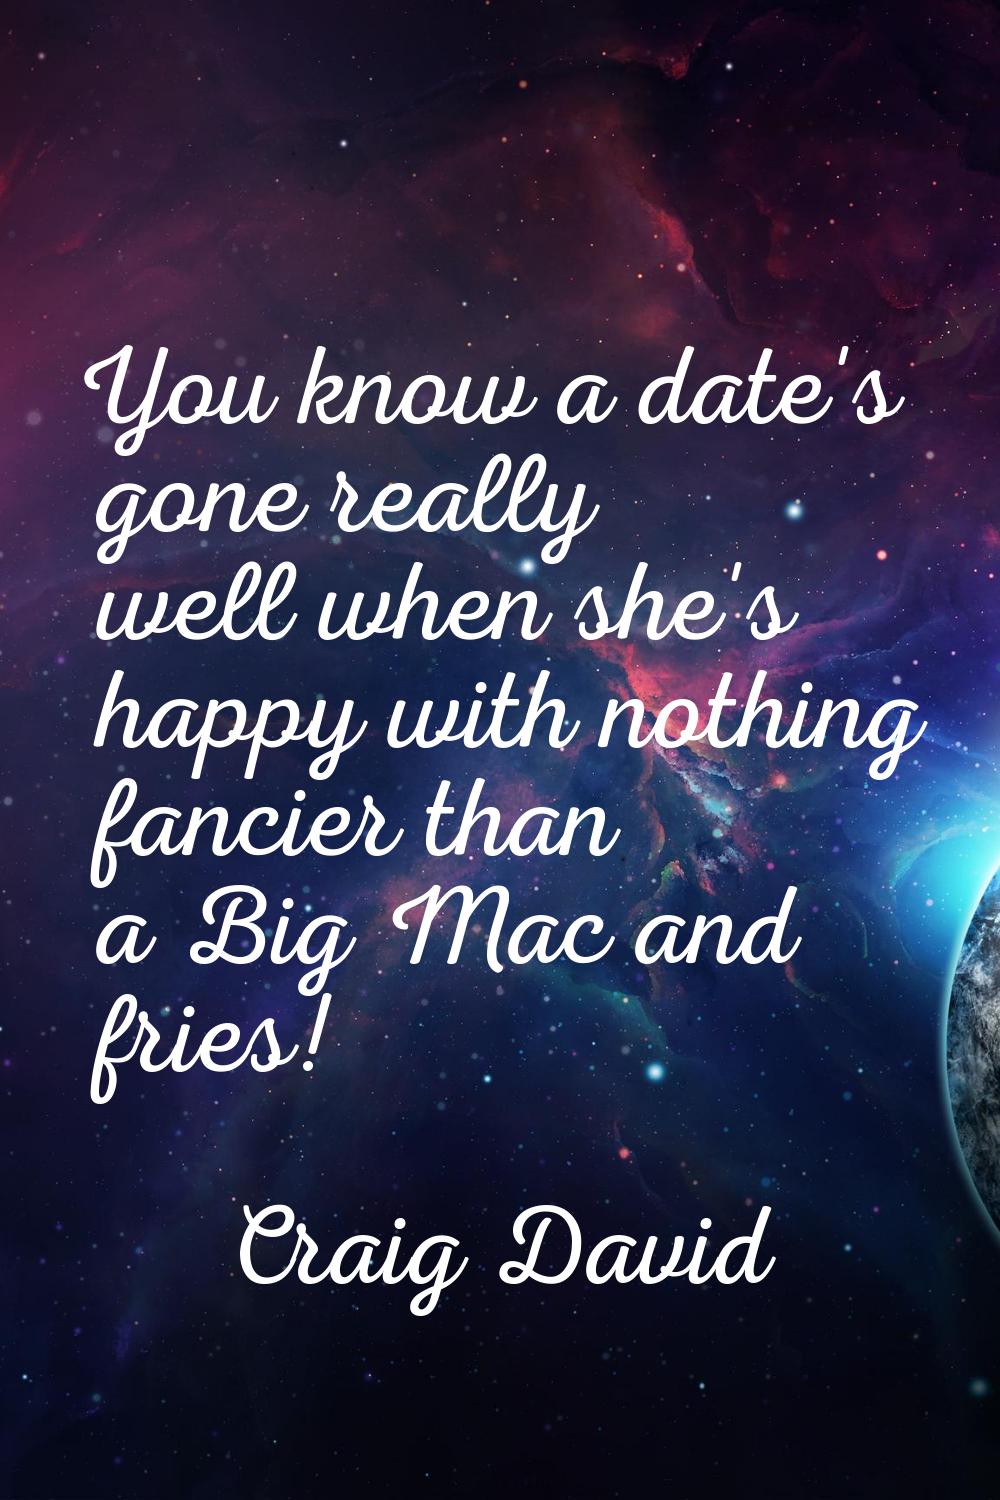 You know a date's gone really well when she's happy with nothing fancier than a Big Mac and fries!